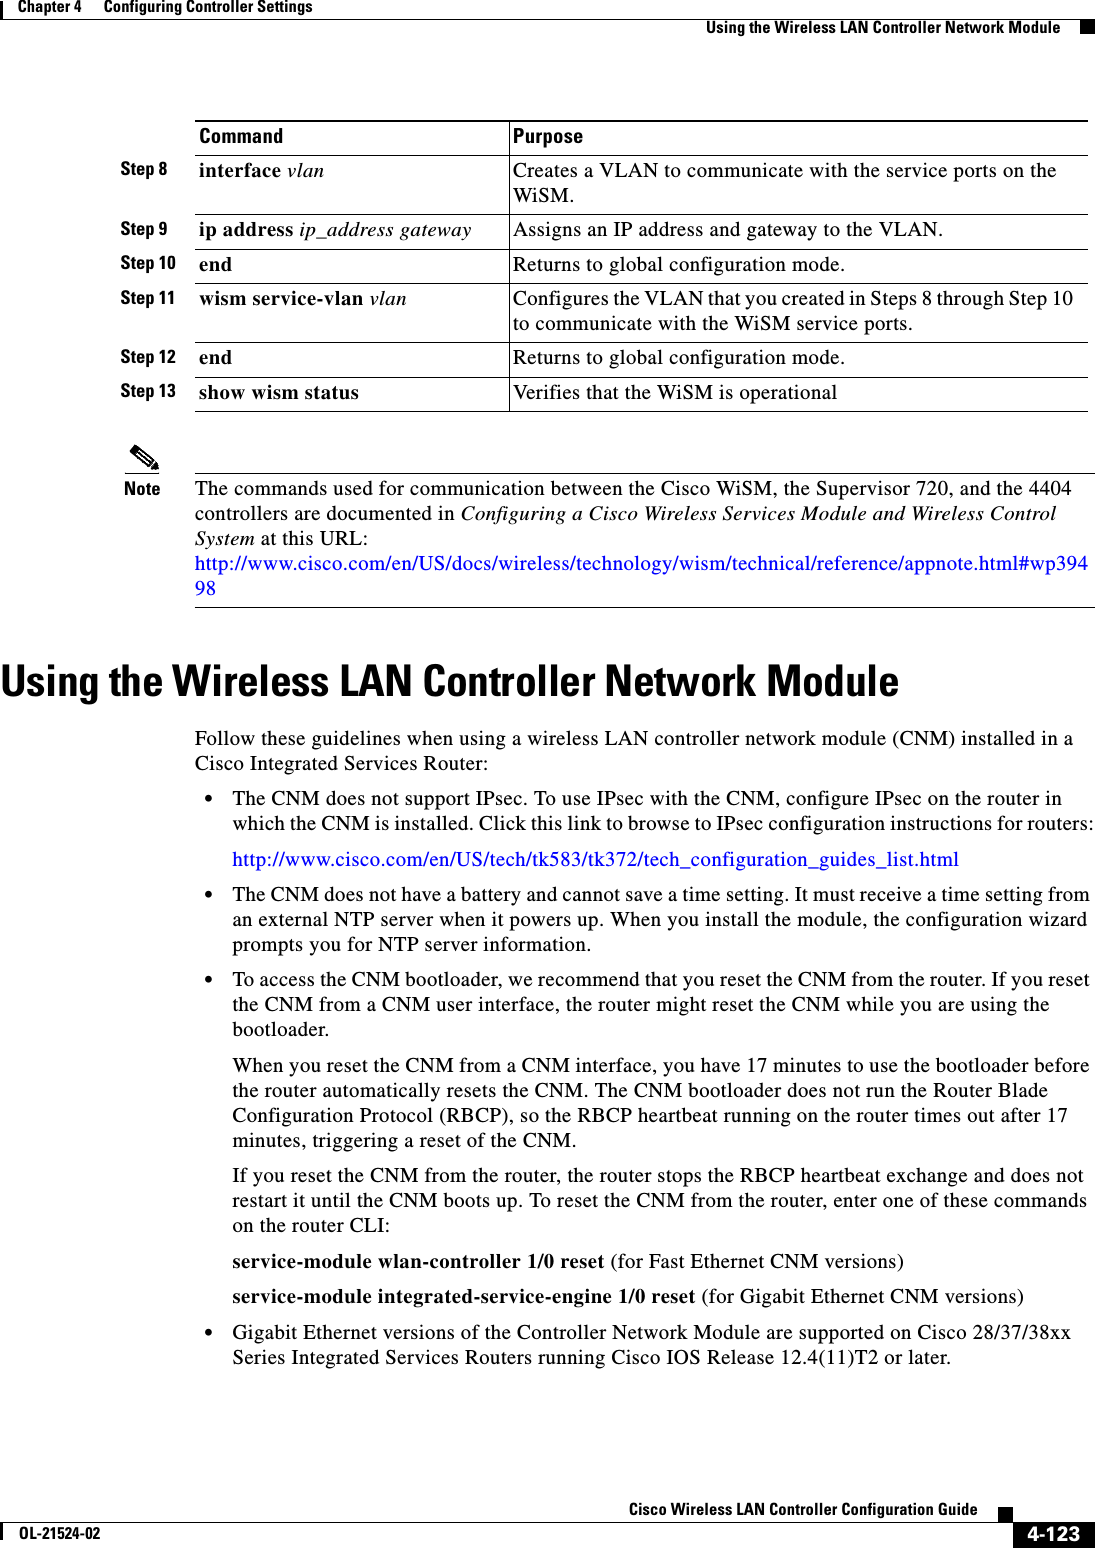  4-123Cisco Wireless LAN Controller Configuration GuideOL-21524-02Chapter 4      Configuring Controller SettingsUsing the Wireless LAN Controller Network ModuleNote The commands used for communication between the Cisco WiSM, the Supervisor 720, and the 4404 controllers are documented in Configuring a Cisco Wireless Services Module and Wireless Control System at this URL: http://www.cisco.com/en/US/docs/wireless/technology/wism/technical/reference/appnote.html#wp39498Using the Wireless LAN Controller Network ModuleFollow these guidelines when using a wireless LAN controller network module (CNM) installed in a Cisco Integrated Services Router:  • The CNM does not support IPsec. To use IPsec with the CNM, configure IPsec on the router in which the CNM is installed. Click this link to browse to IPsec configuration instructions for routers:http://www.cisco.com/en/US/tech/tk583/tk372/tech_configuration_guides_list.html  • The CNM does not have a battery and cannot save a time setting. It must receive a time setting from an external NTP server when it powers up. When you install the module, the configuration wizard prompts you for NTP server information.  • To access the CNM bootloader, we recommend that you reset the CNM from the router. If you reset the CNM from a CNM user interface, the router might reset the CNM while you are using the bootloader. When you reset the CNM from a CNM interface, you have 17 minutes to use the bootloader before the router automatically resets the CNM. The CNM bootloader does not run the Router Blade Configuration Protocol (RBCP), so the RBCP heartbeat running on the router times out after 17 minutes, triggering a reset of the CNM.If you reset the CNM from the router, the router stops the RBCP heartbeat exchange and does not restart it until the CNM boots up. To reset the CNM from the router, enter one of these commands on the router CLI:service-module wlan-controller 1/0 reset (for Fast Ethernet CNM versions)service-module integrated-service-engine 1/0 reset (for Gigabit Ethernet CNM versions)  • Gigabit Ethernet versions of the Controller Network Module are supported on Cisco 28/37/38xx Series Integrated Services Routers running Cisco IOS Release 12.4(11)T2 or later.Step 8 interface vlan Creates a VLAN to communicate with the service ports on the WiSM.Step 9 ip address ip_address gateway Assigns an IP address and gateway to the VLAN.Step 10 end Returns to global configuration mode.Step 11 wism service-vlan vlan Configures the VLAN that you created in Steps 8 through Step 10 to communicate with the WiSM service ports.Step 12 end Returns to global configuration mode.Step 13 show wism status Verifies that the WiSM is operationalCommand Purpose